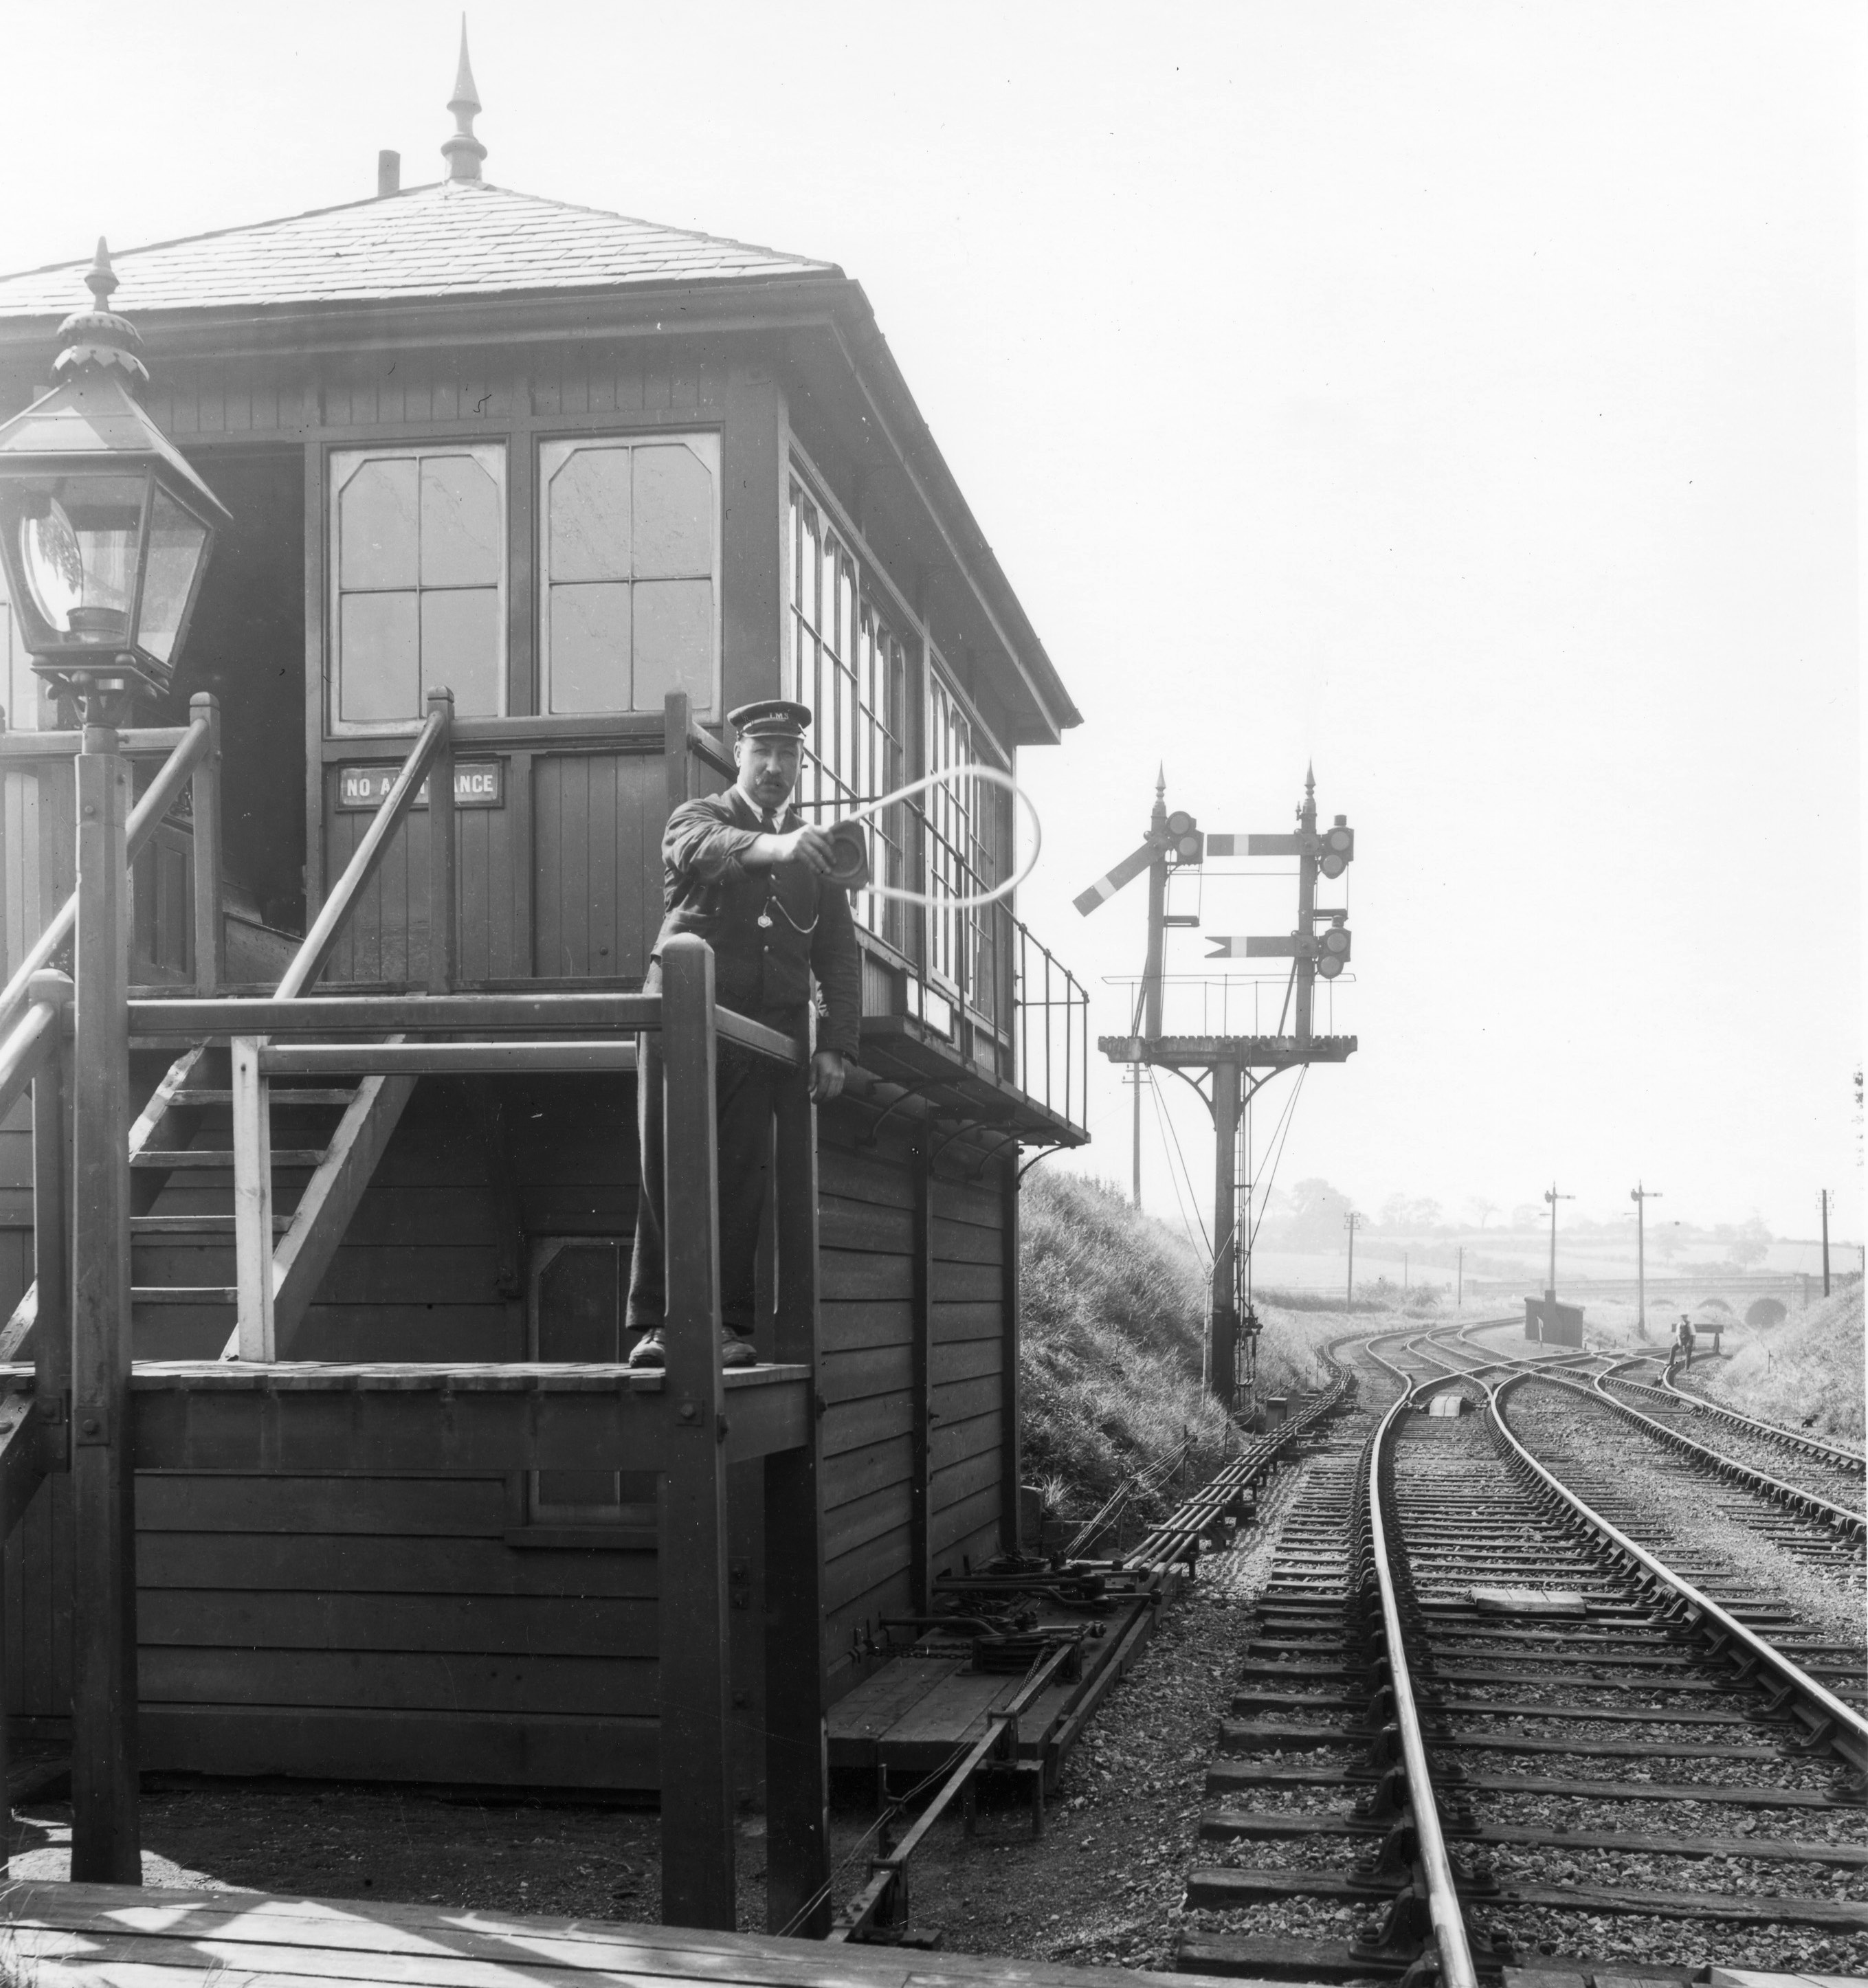 A LMS signalman posing on the steps of his signal box holdong out a single line toekn for a (non-existent) train to collect.